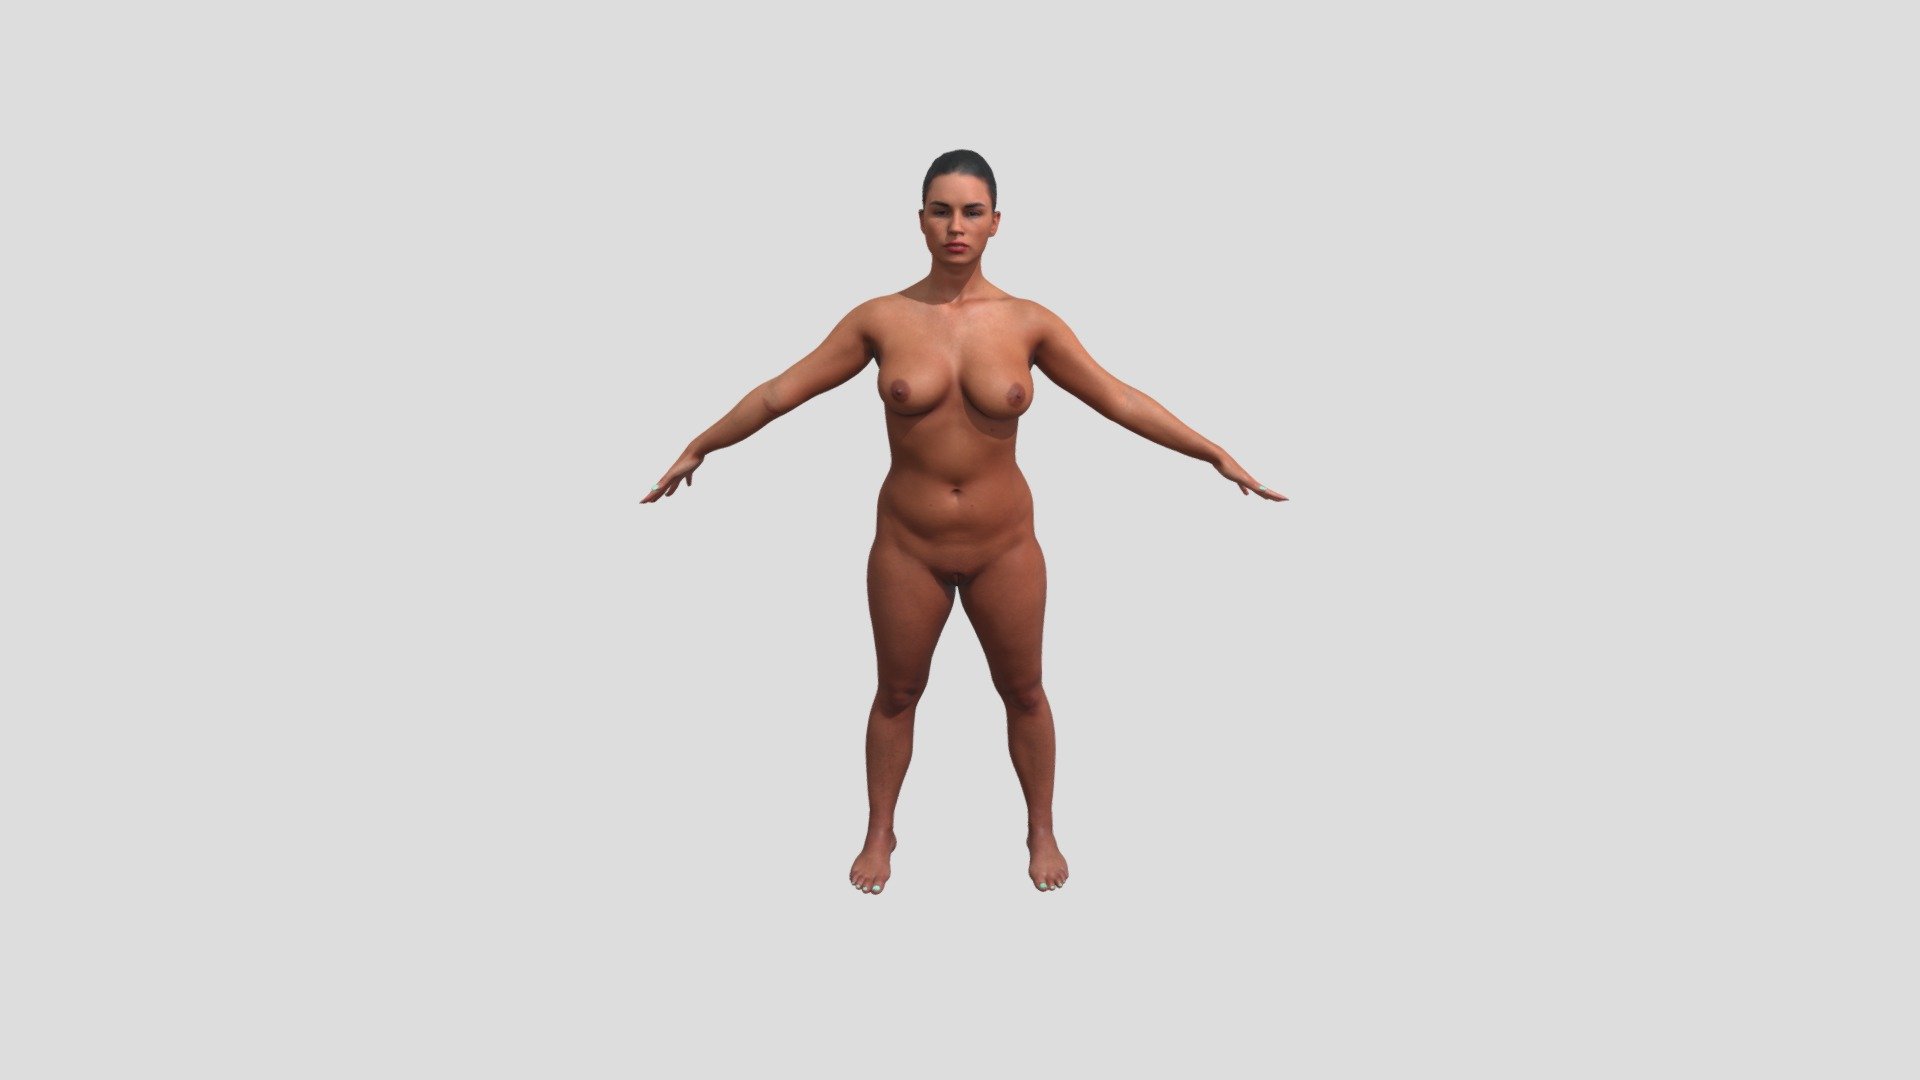 Real Life Human Scans is a project by 3Dsk which focus on diversity of human bodies, faces and expressions.

Ethnicity: white
Gender: female
Age: 23
Height: 163 cm
Weight: 62 kg

Technical Specifications:




OBJ file / 710 000 polys

8k / PNG diffuse texture

NOTE: This is a cleaned raw scan in Zbrush postproduction but no retopology.
This is the version with less poly without Zbrush file.

3Dsk Store provides all you need for 2D&amp;3D artist and game developers. Explore raw 3D scans &amp; retopologized models of head, hand, full body in A-pose or daily pose and props. And a variety of 2D references such as Photo set of standing and sitting man/woman, flexing &amp; expressions. Premade head texture, HD skin and HD eye details 3d model